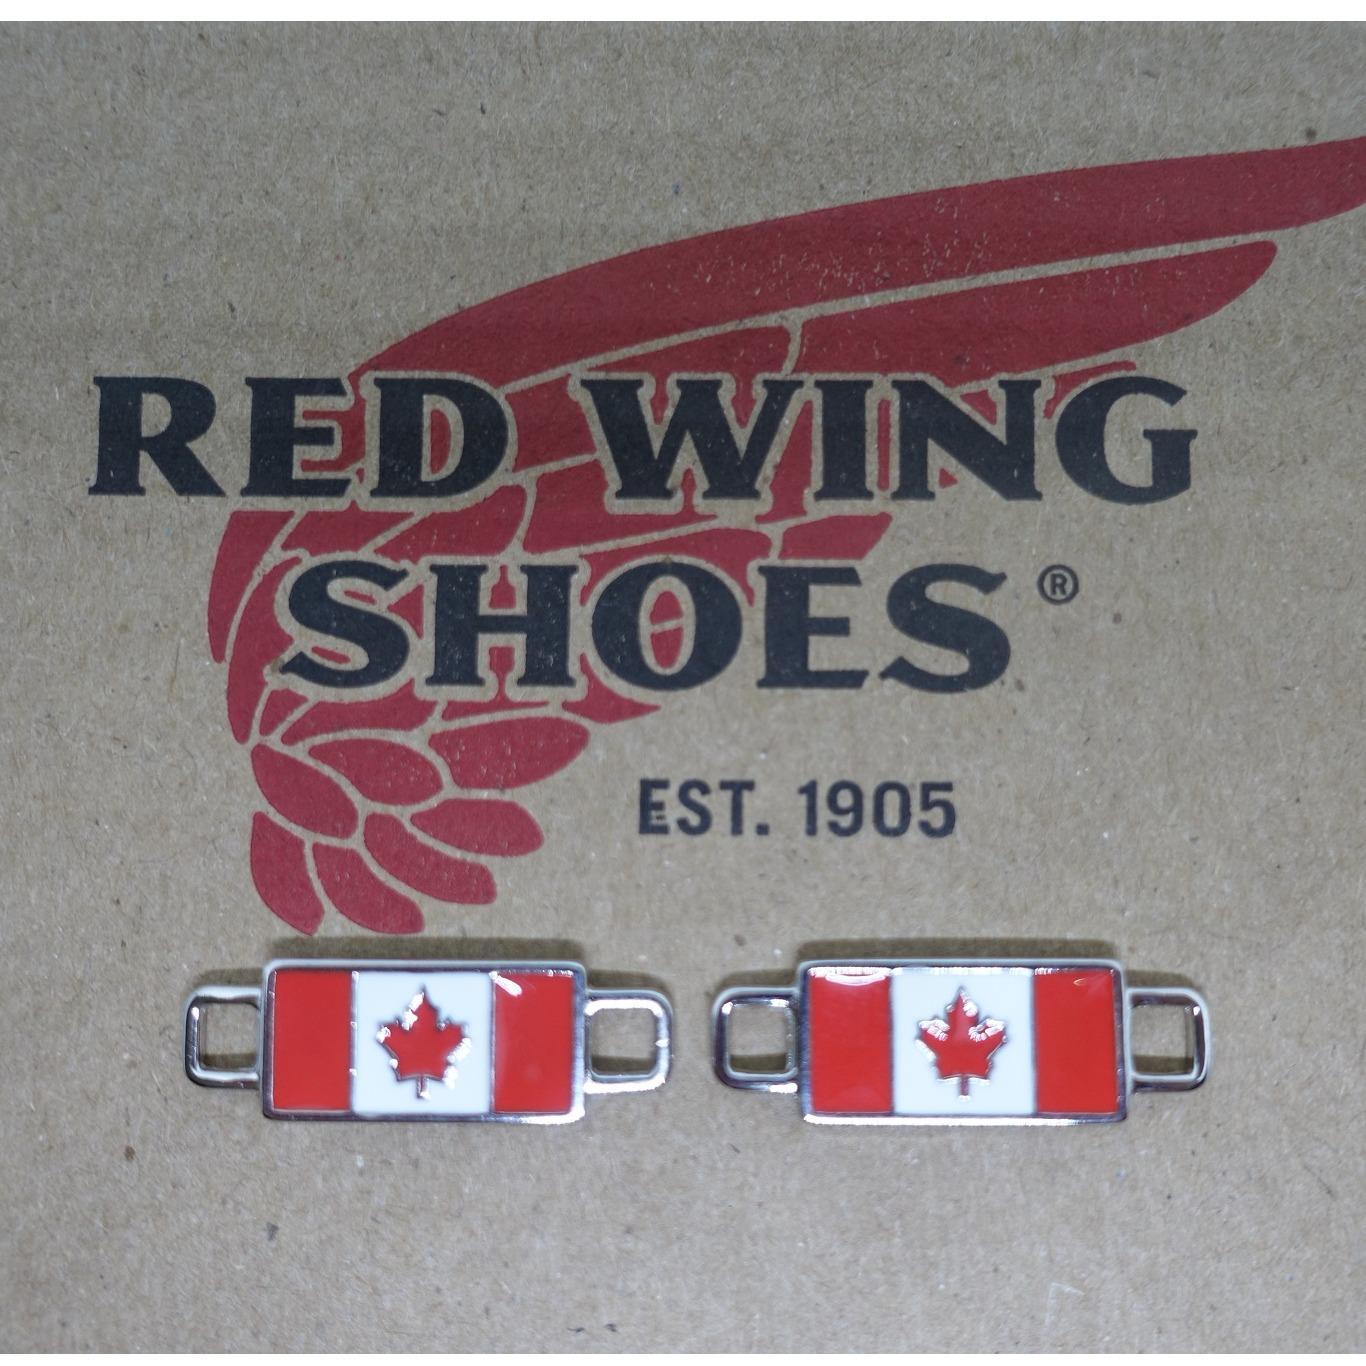 Red Wing Boots Logo - Red Wing Shoes Men's Shoes price in Malaysia Red Wing Shoes